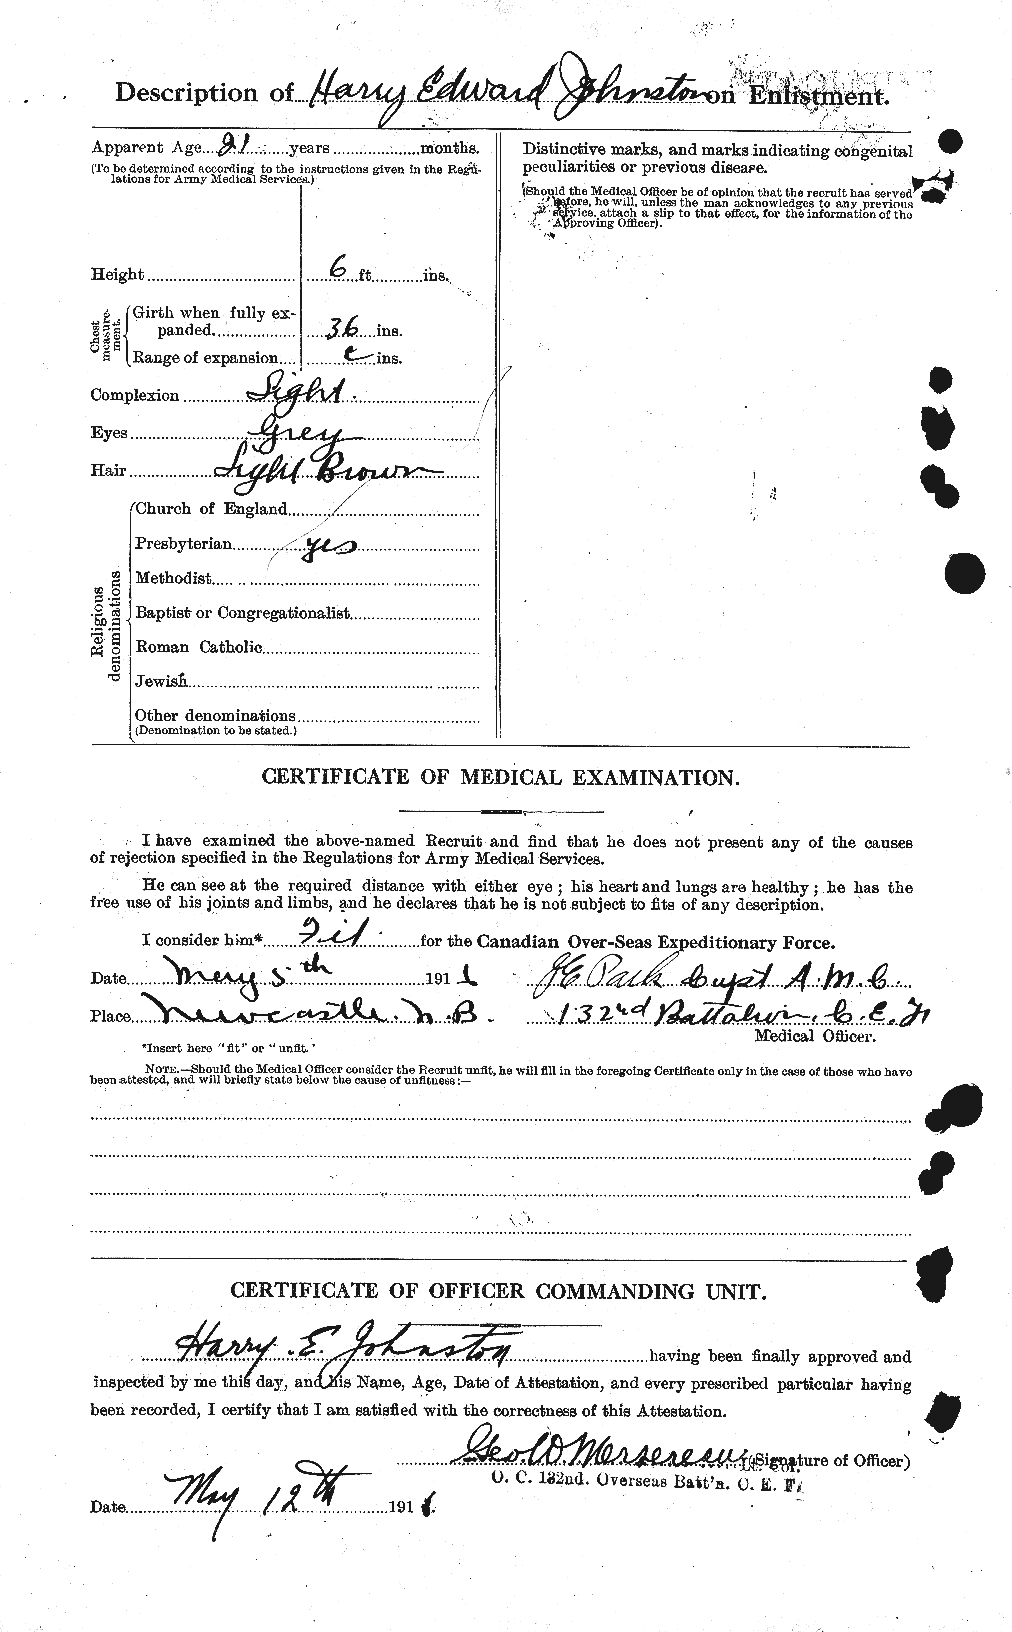 Personnel Records of the First World War - CEF 419514b